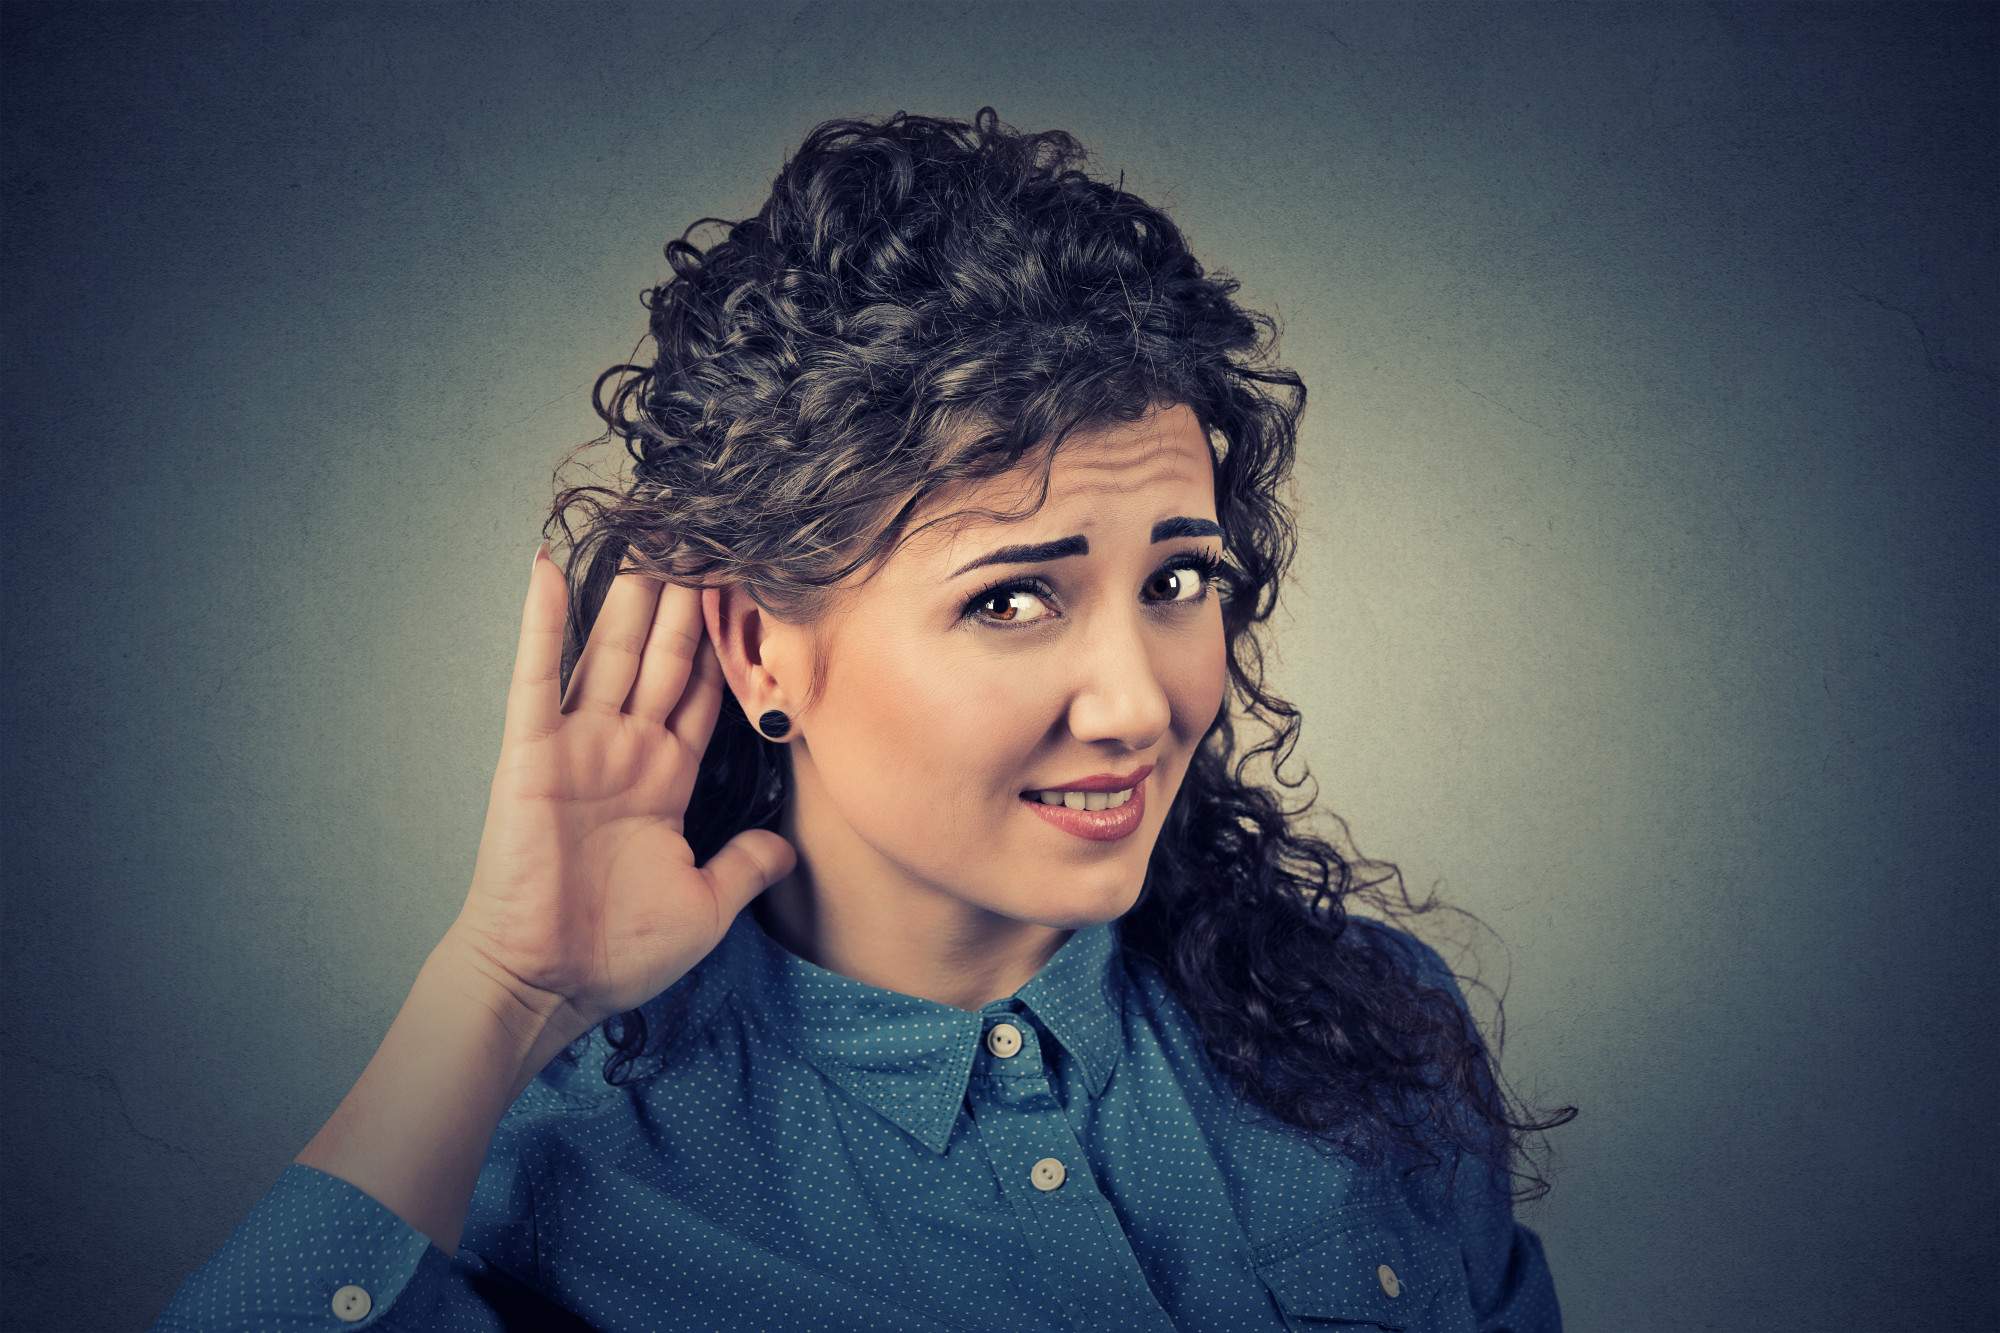 5 Signs of Hearing Loss You Should Never Ignore